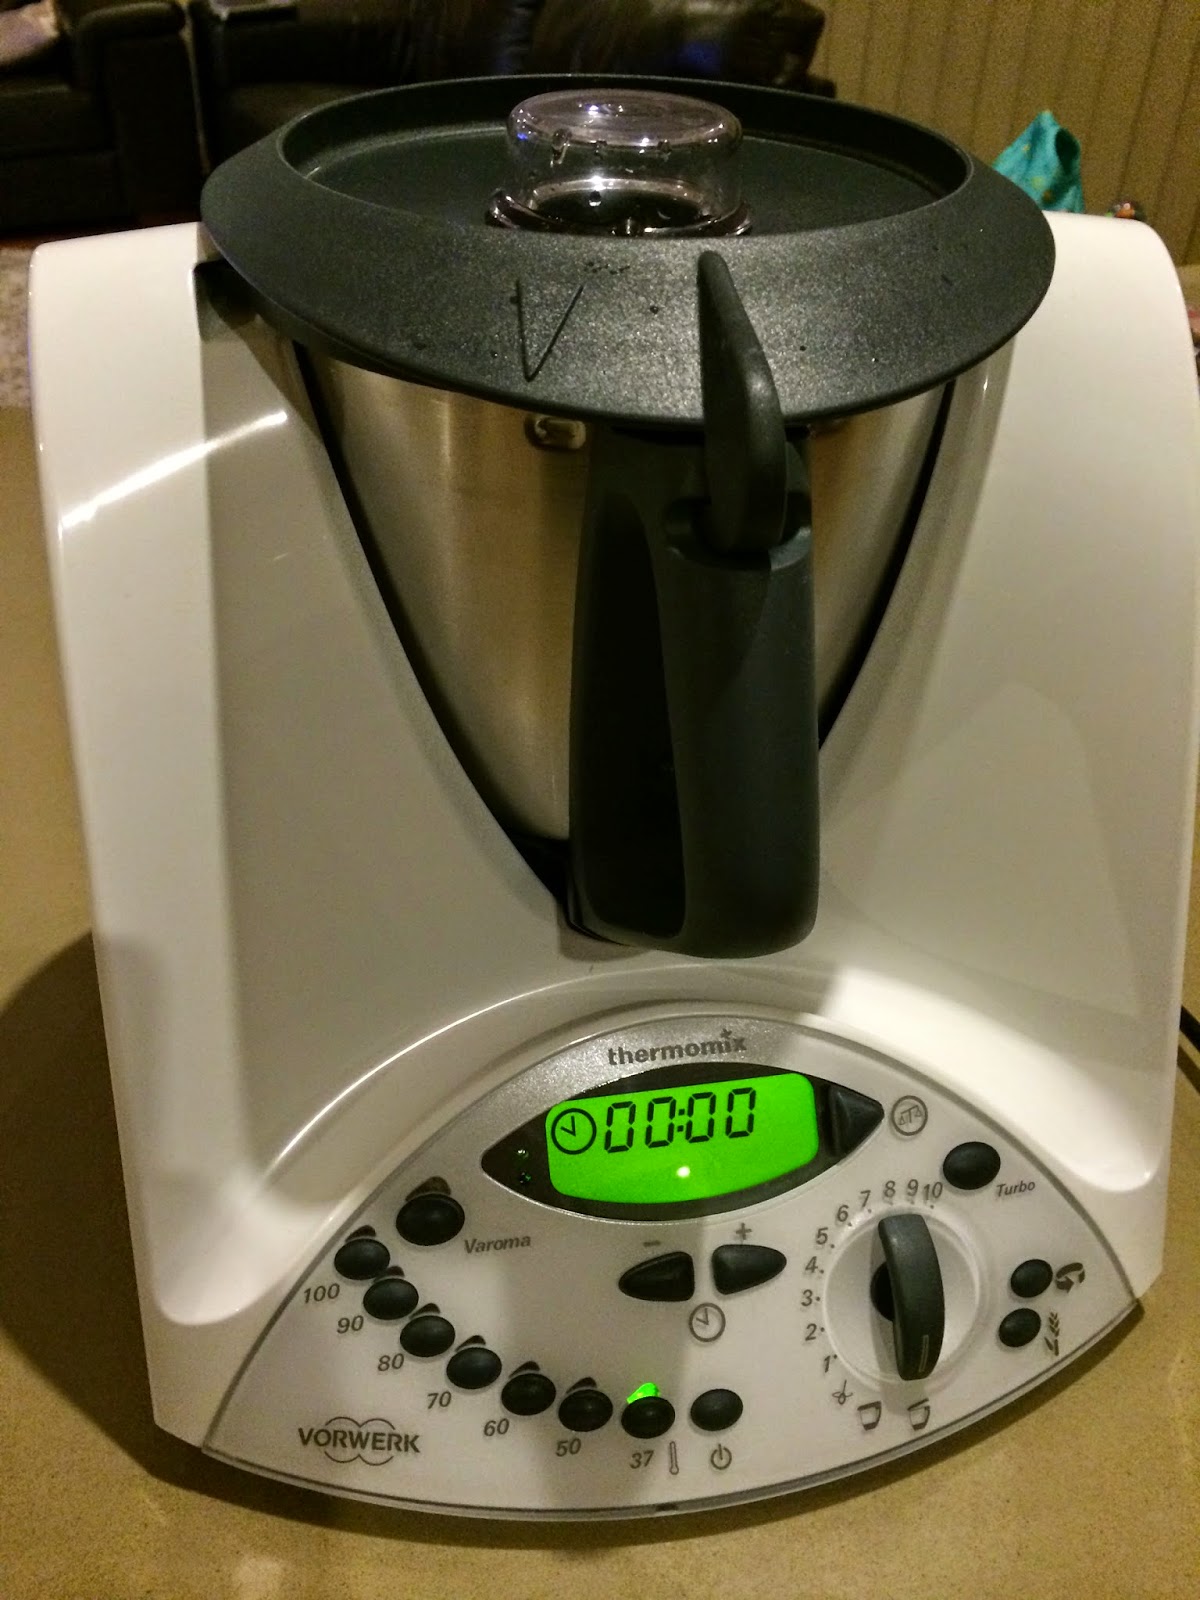 Breathe Gently The Great Thermomix Debacle of 2014